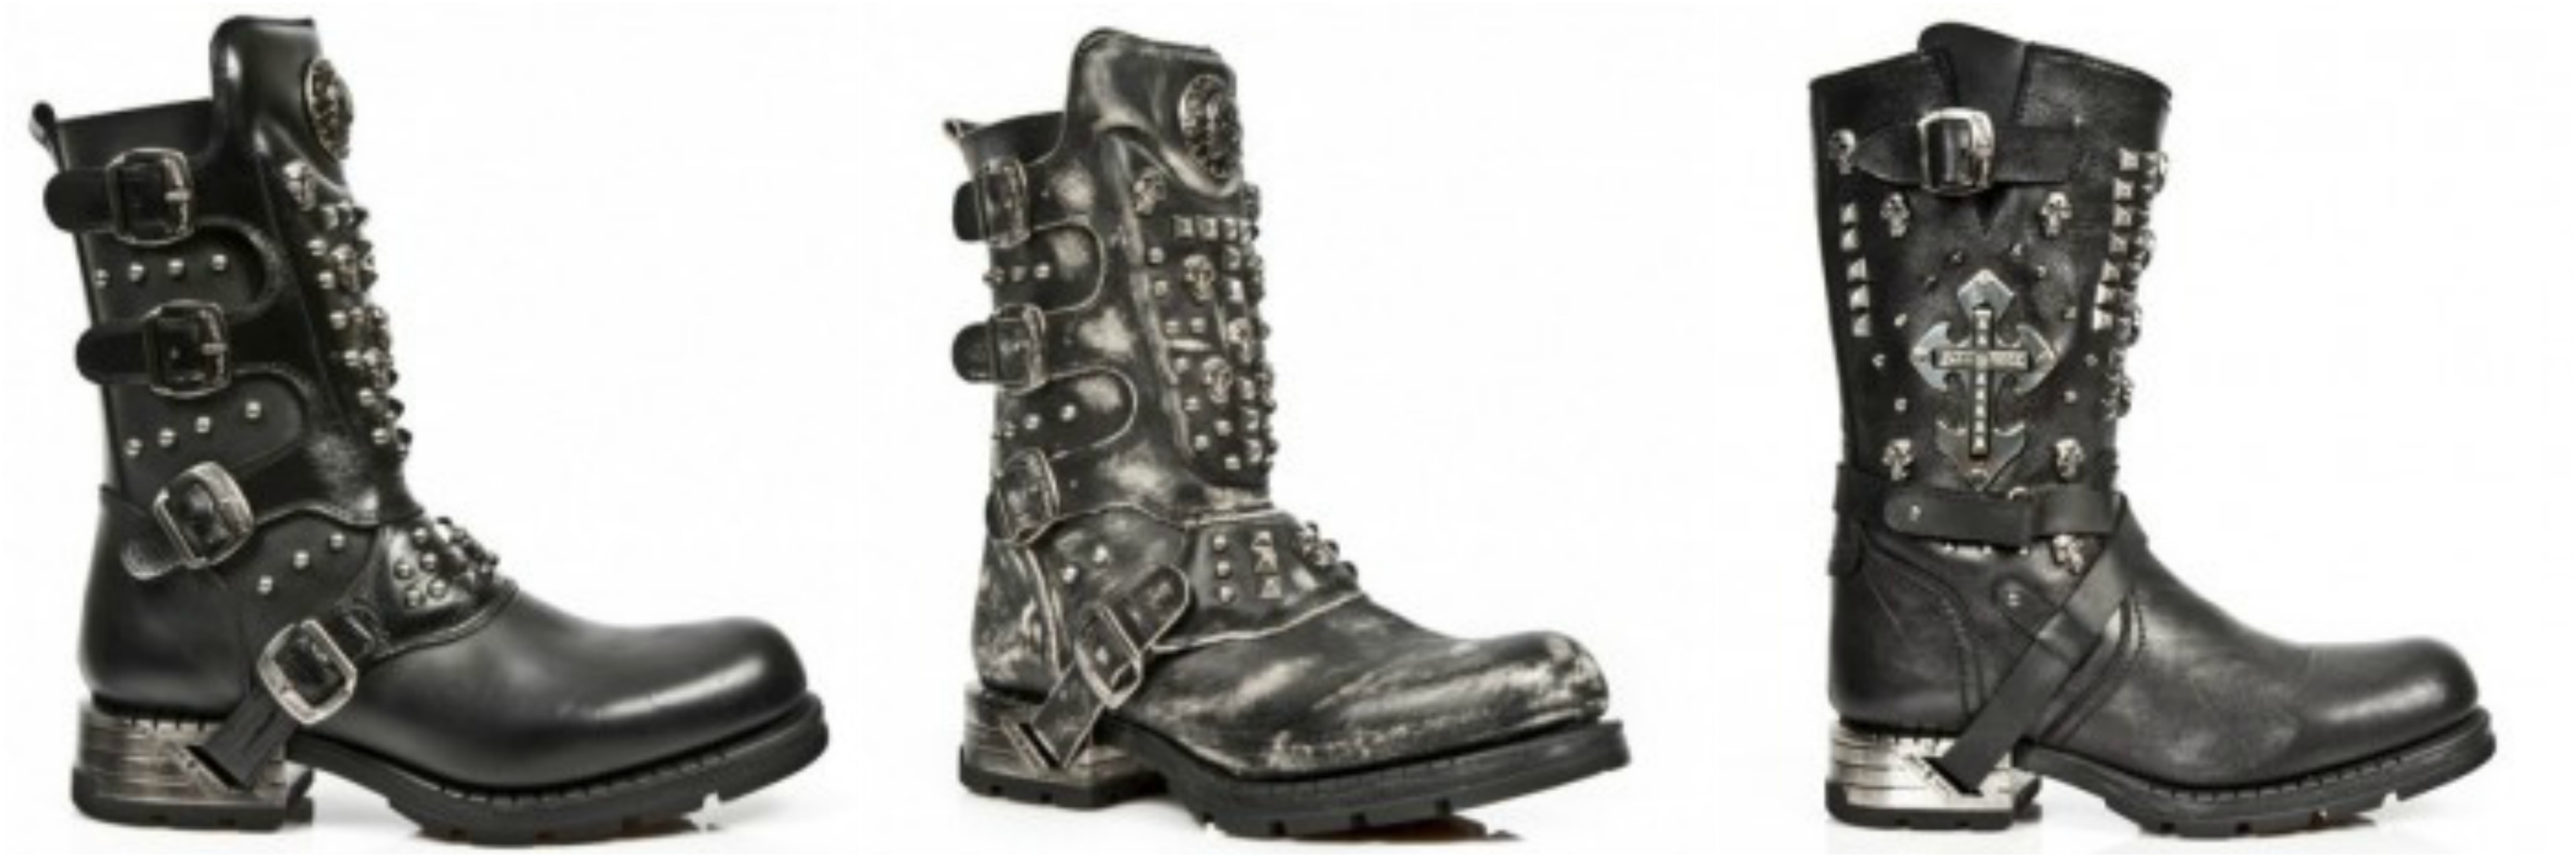 motorcycle boots style